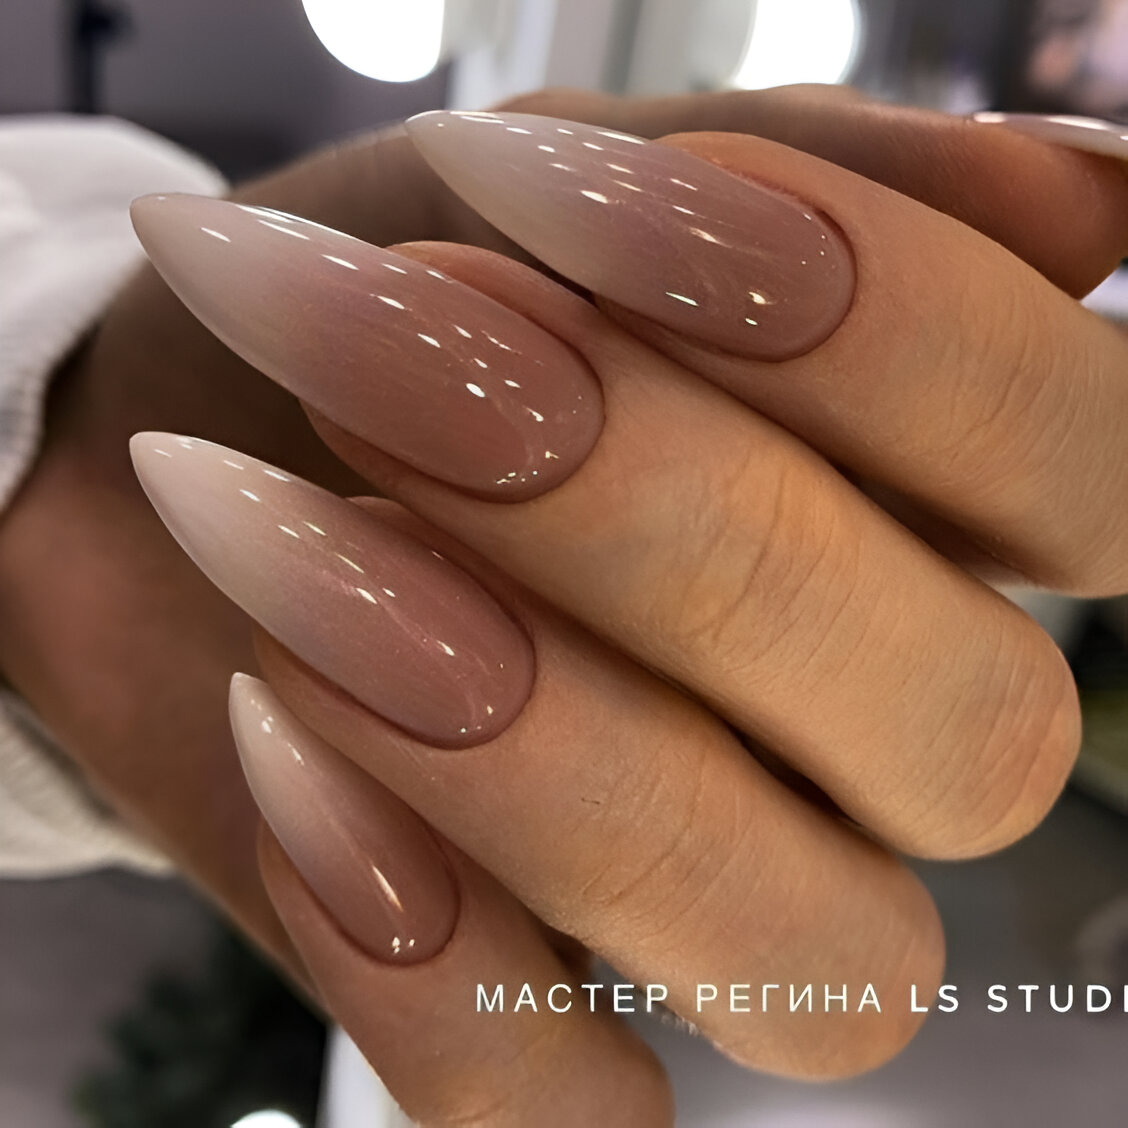 30 Classy Nude Nail Designs Perfect For Elegant Ladies - T-News